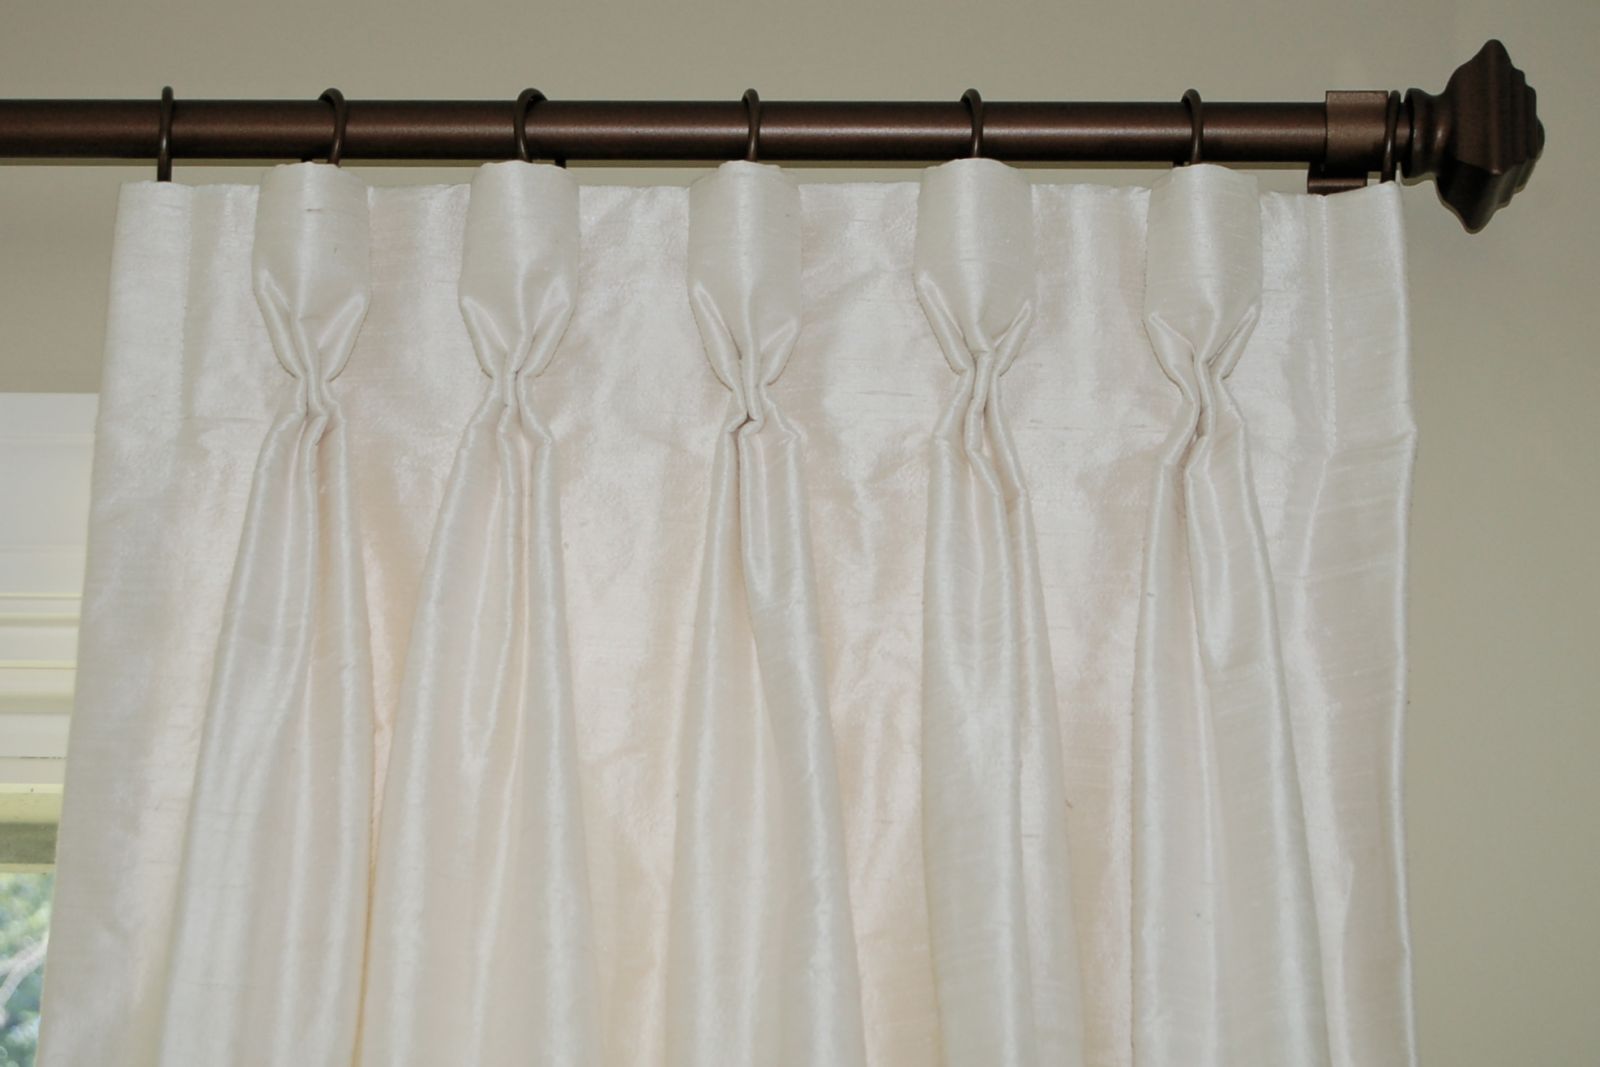 Goblet Pleat Drapes & Curtains Custom Made To Your Exact With Solid Cotton Pleated Curtains (View 7 of 30)